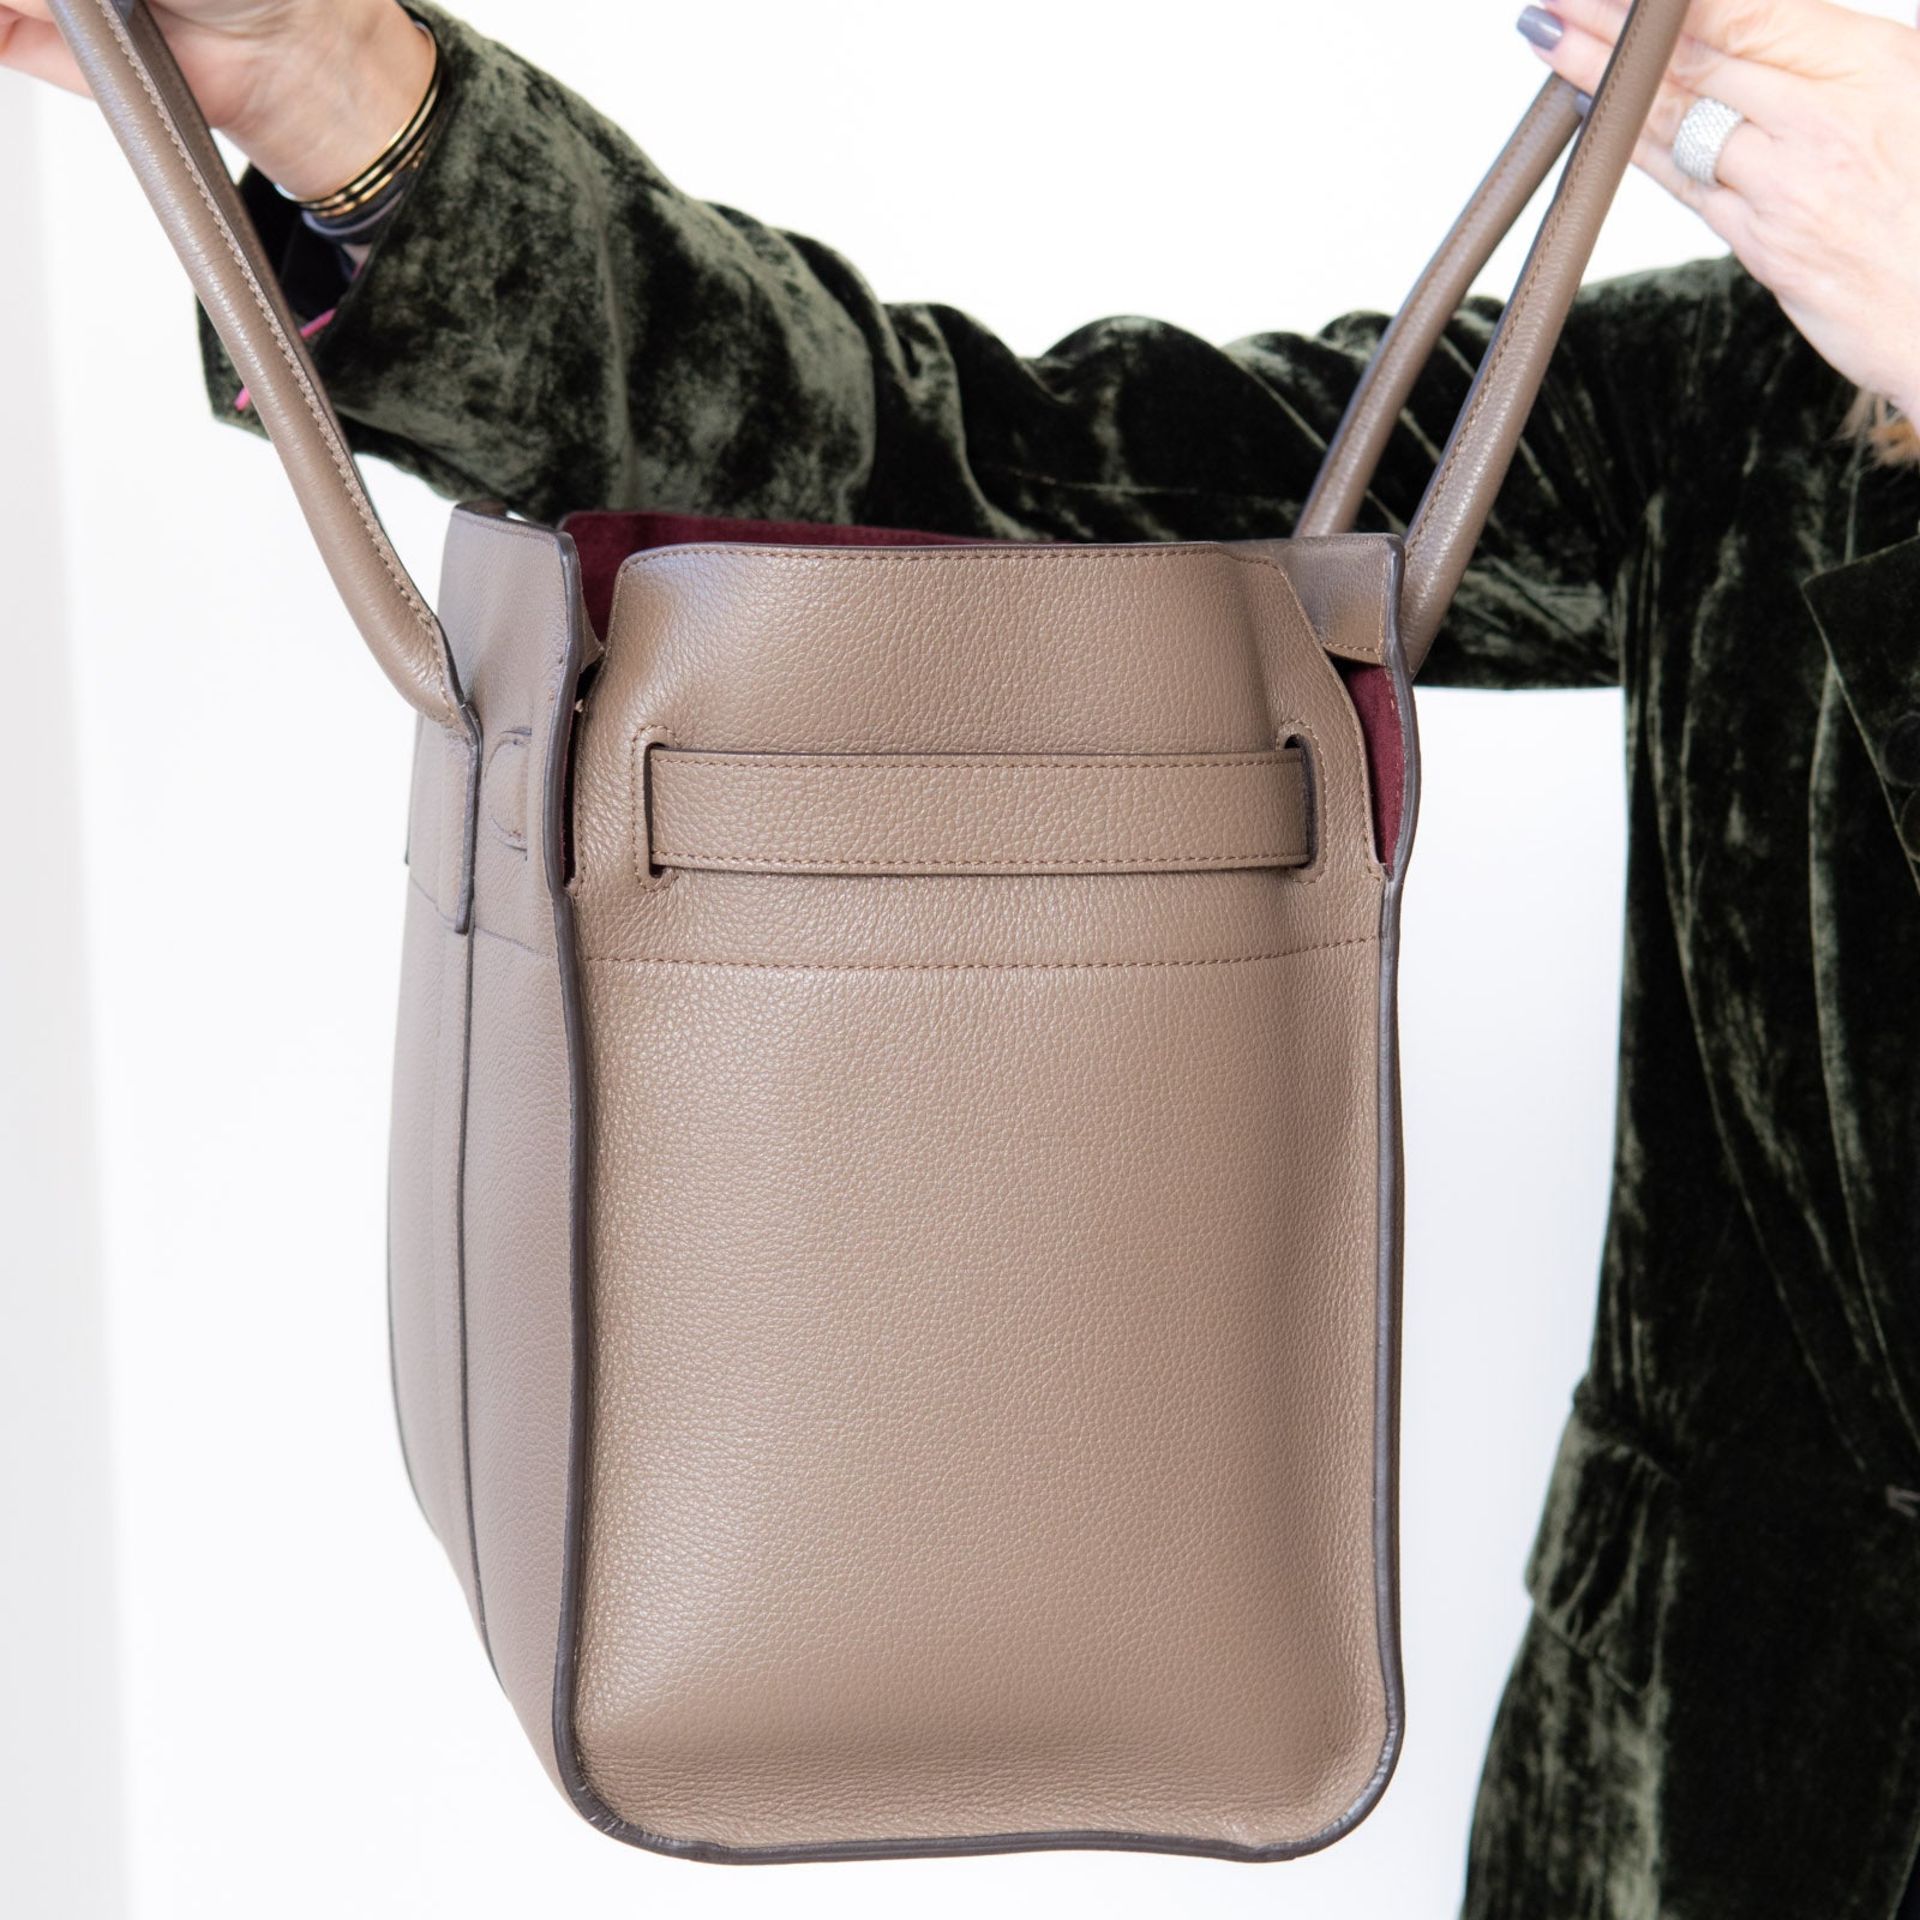 Mulberry Mushroom Zipped Bayswater Leather Bag - Image 10 of 10